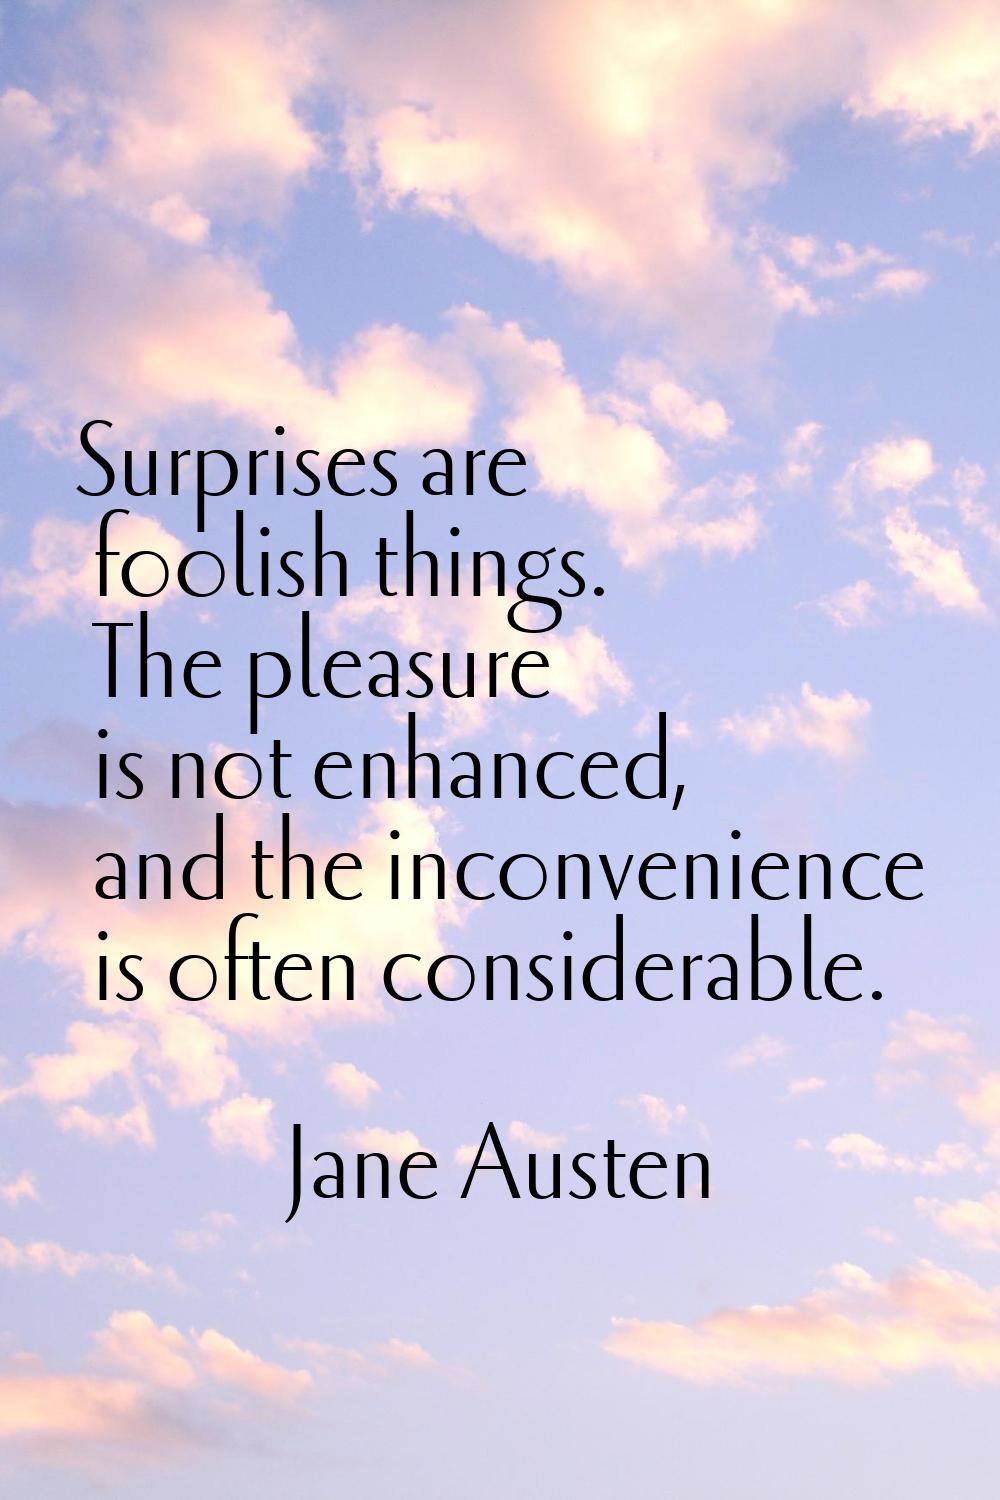 Surprises are foolish things. The pleasure is not enhanced, and the inconvenience is often consider